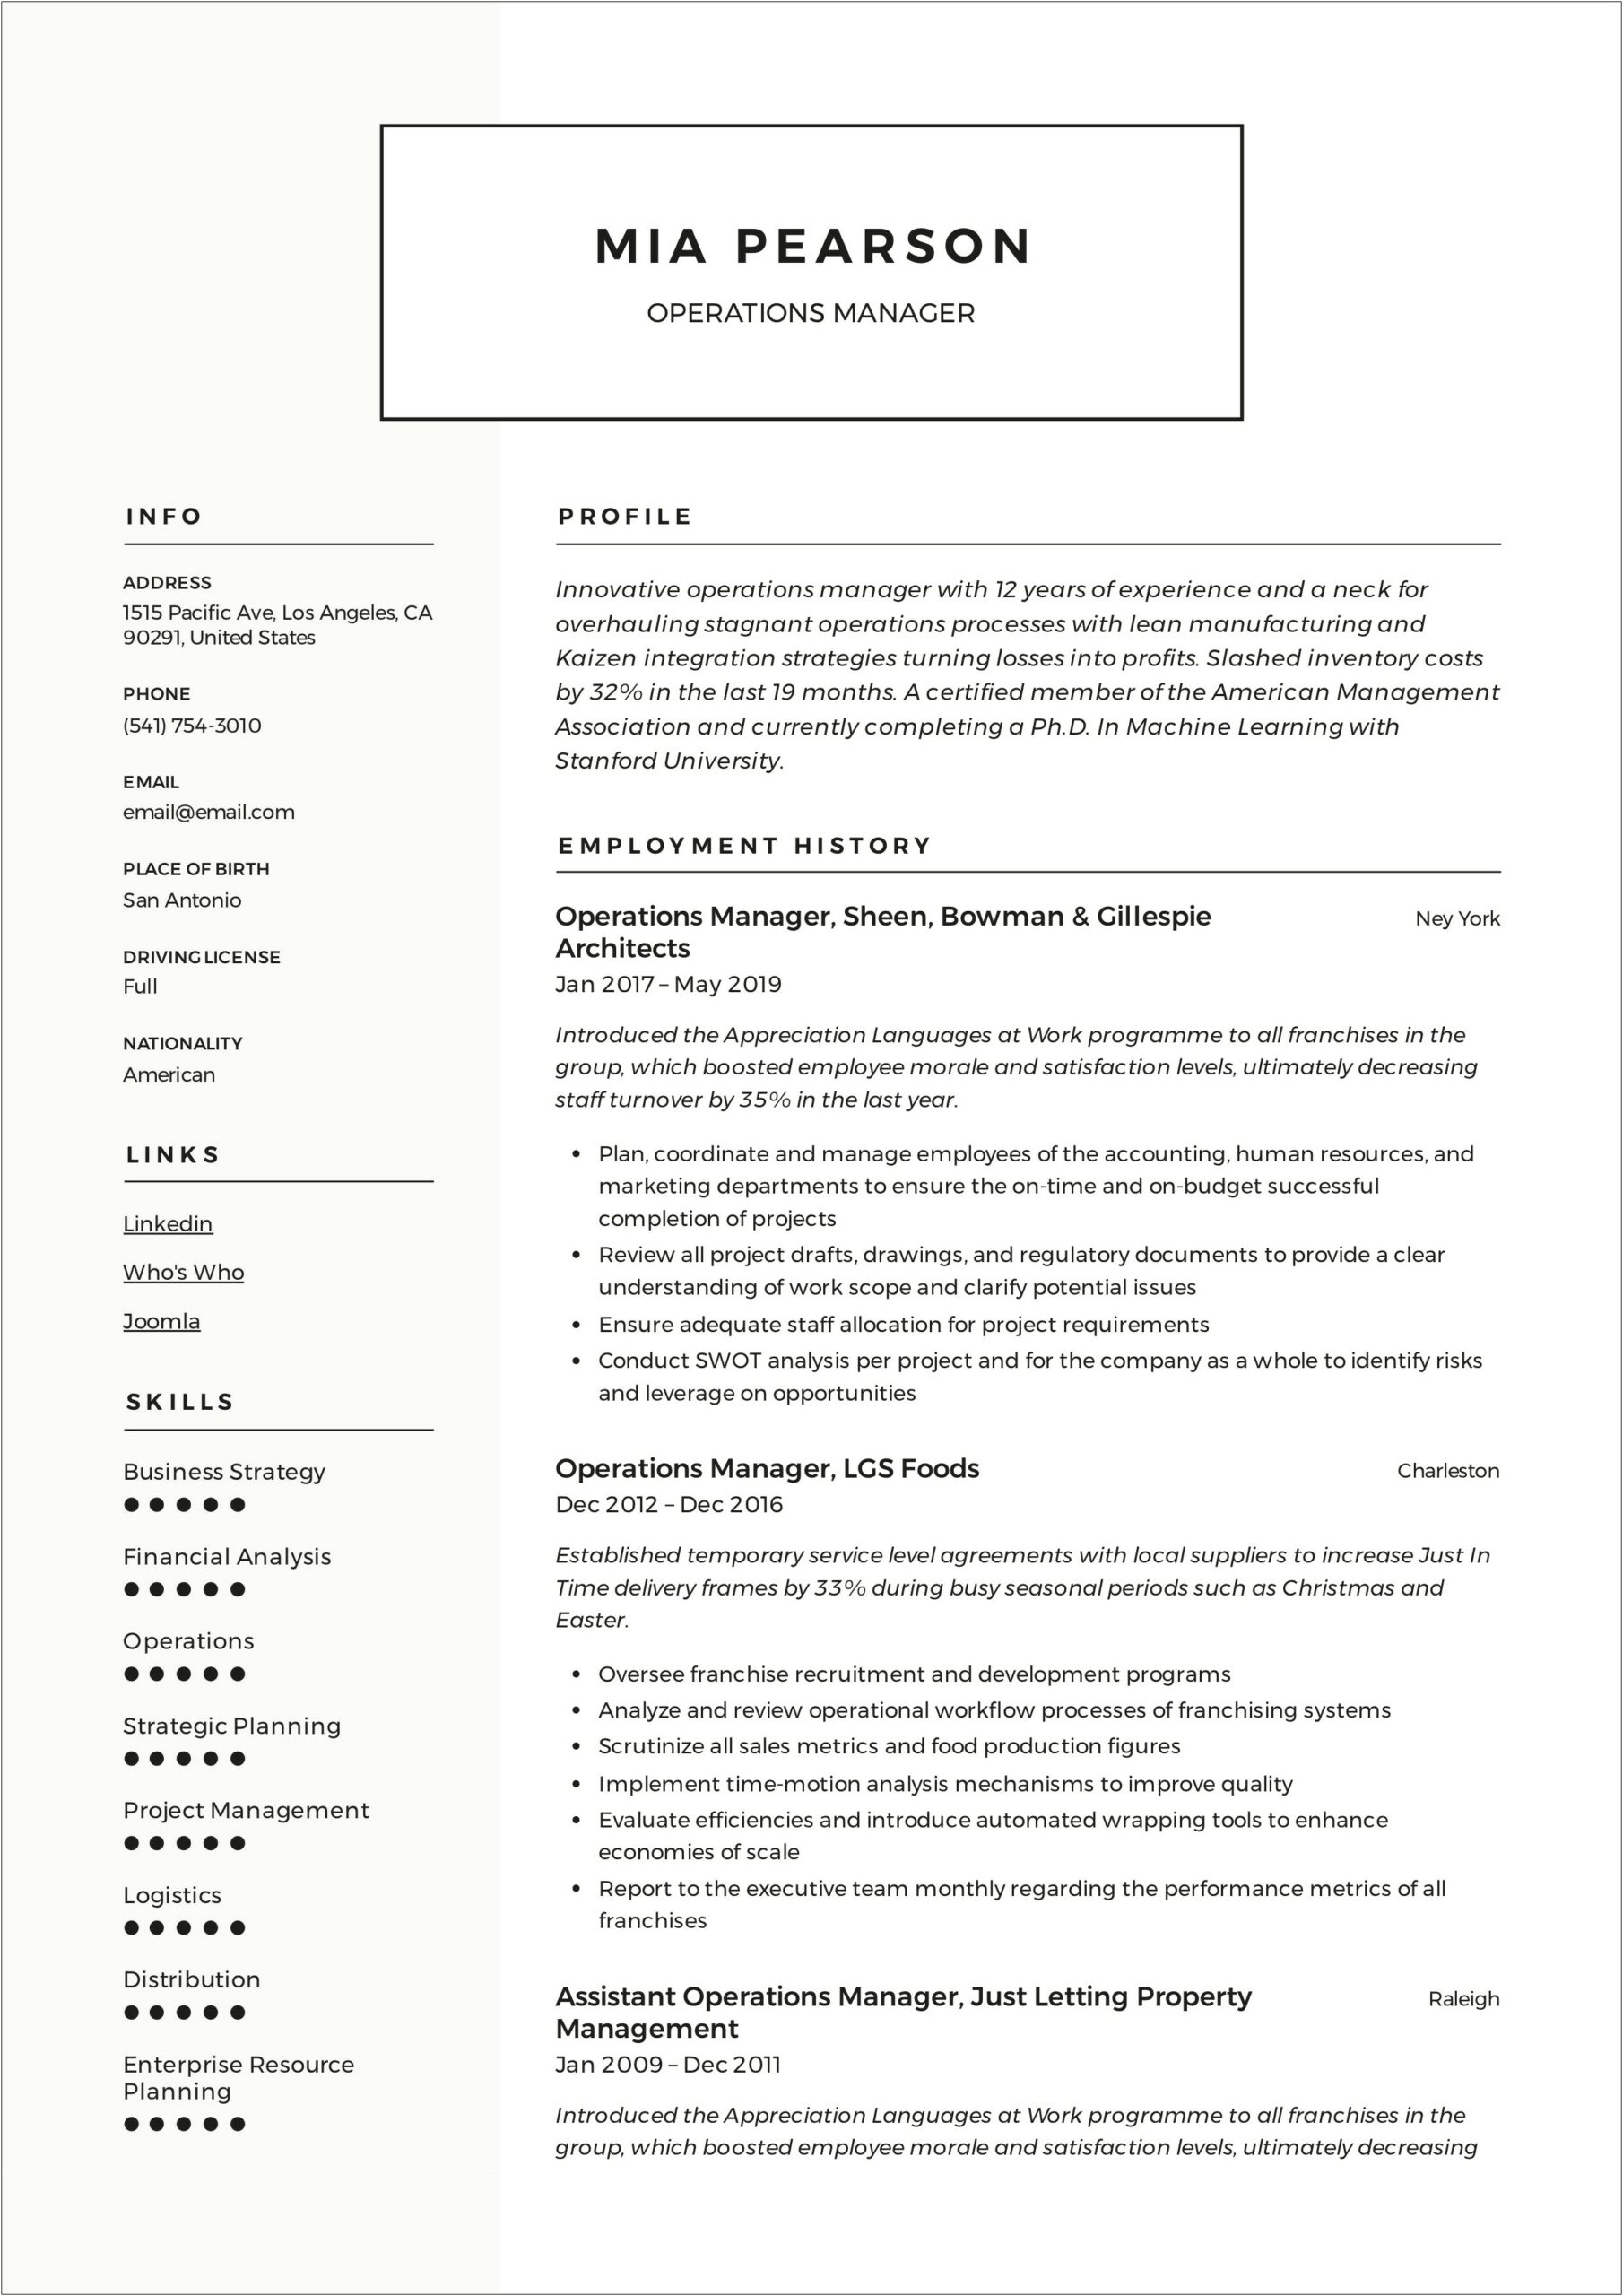 Resume Business Manager Operations Filetype Pdf